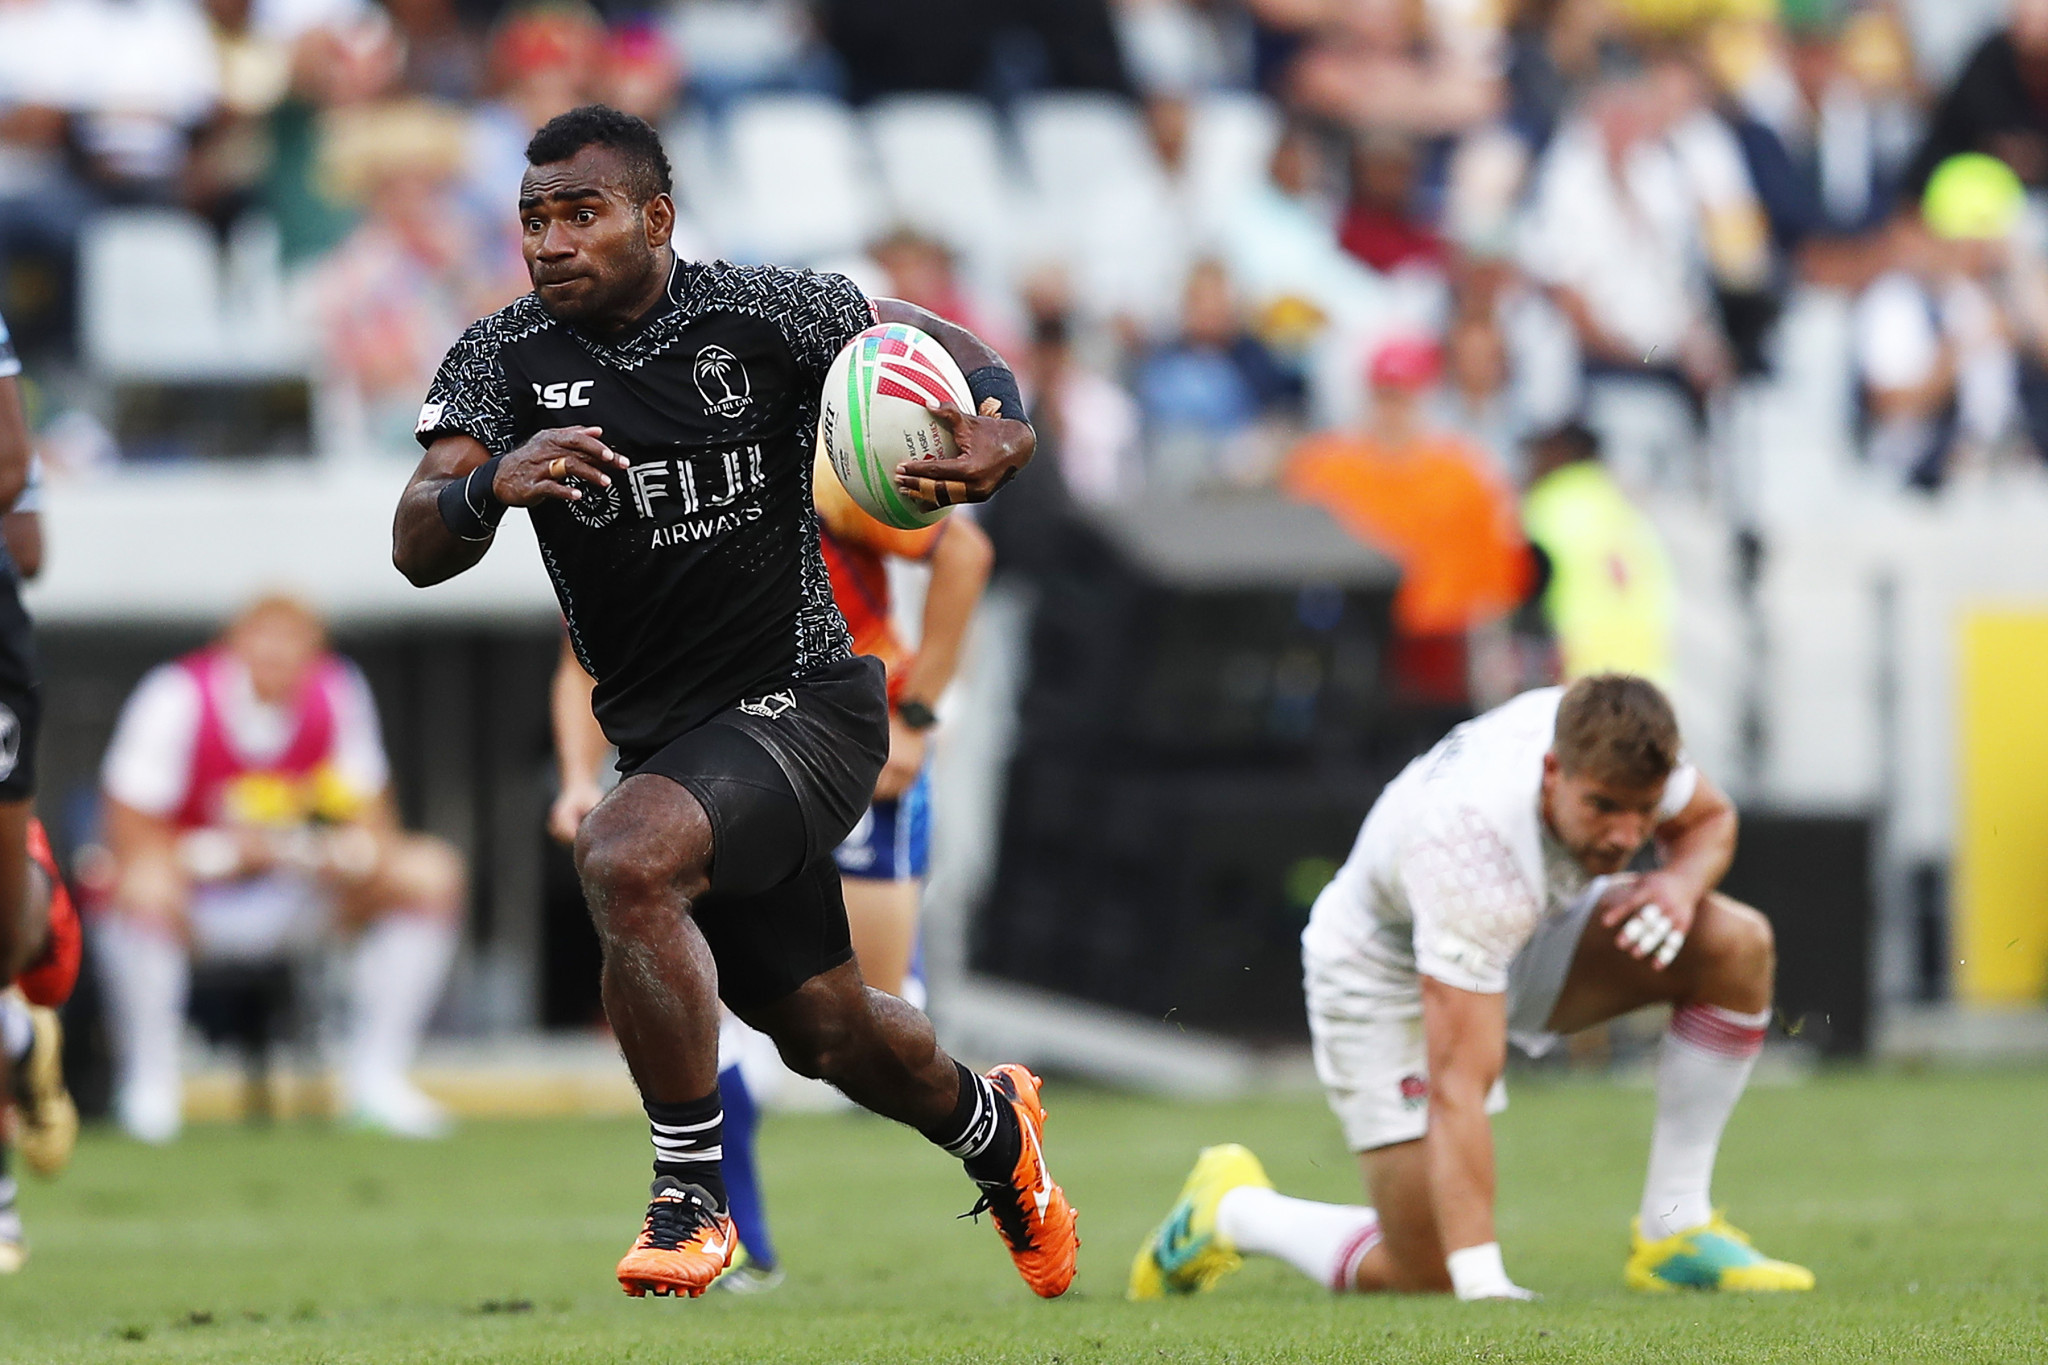 Fiji won three games in three to progress to the quarter-finals of the World Rugby Sevens Series in Cape Town ©World Rugby